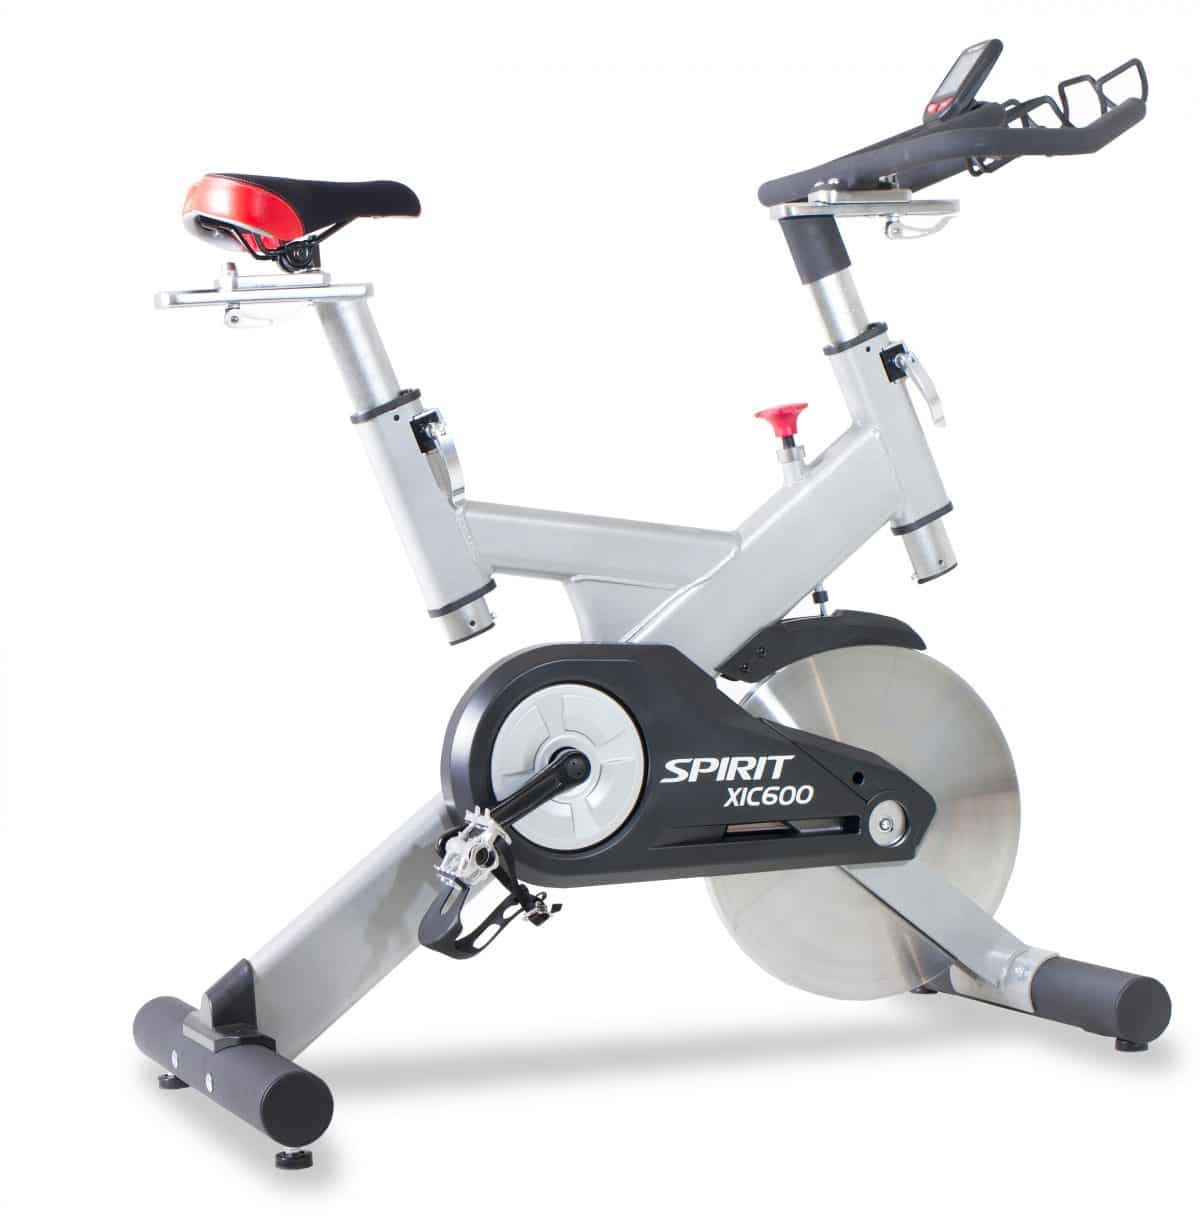 A stationary bike is shown on a white background.